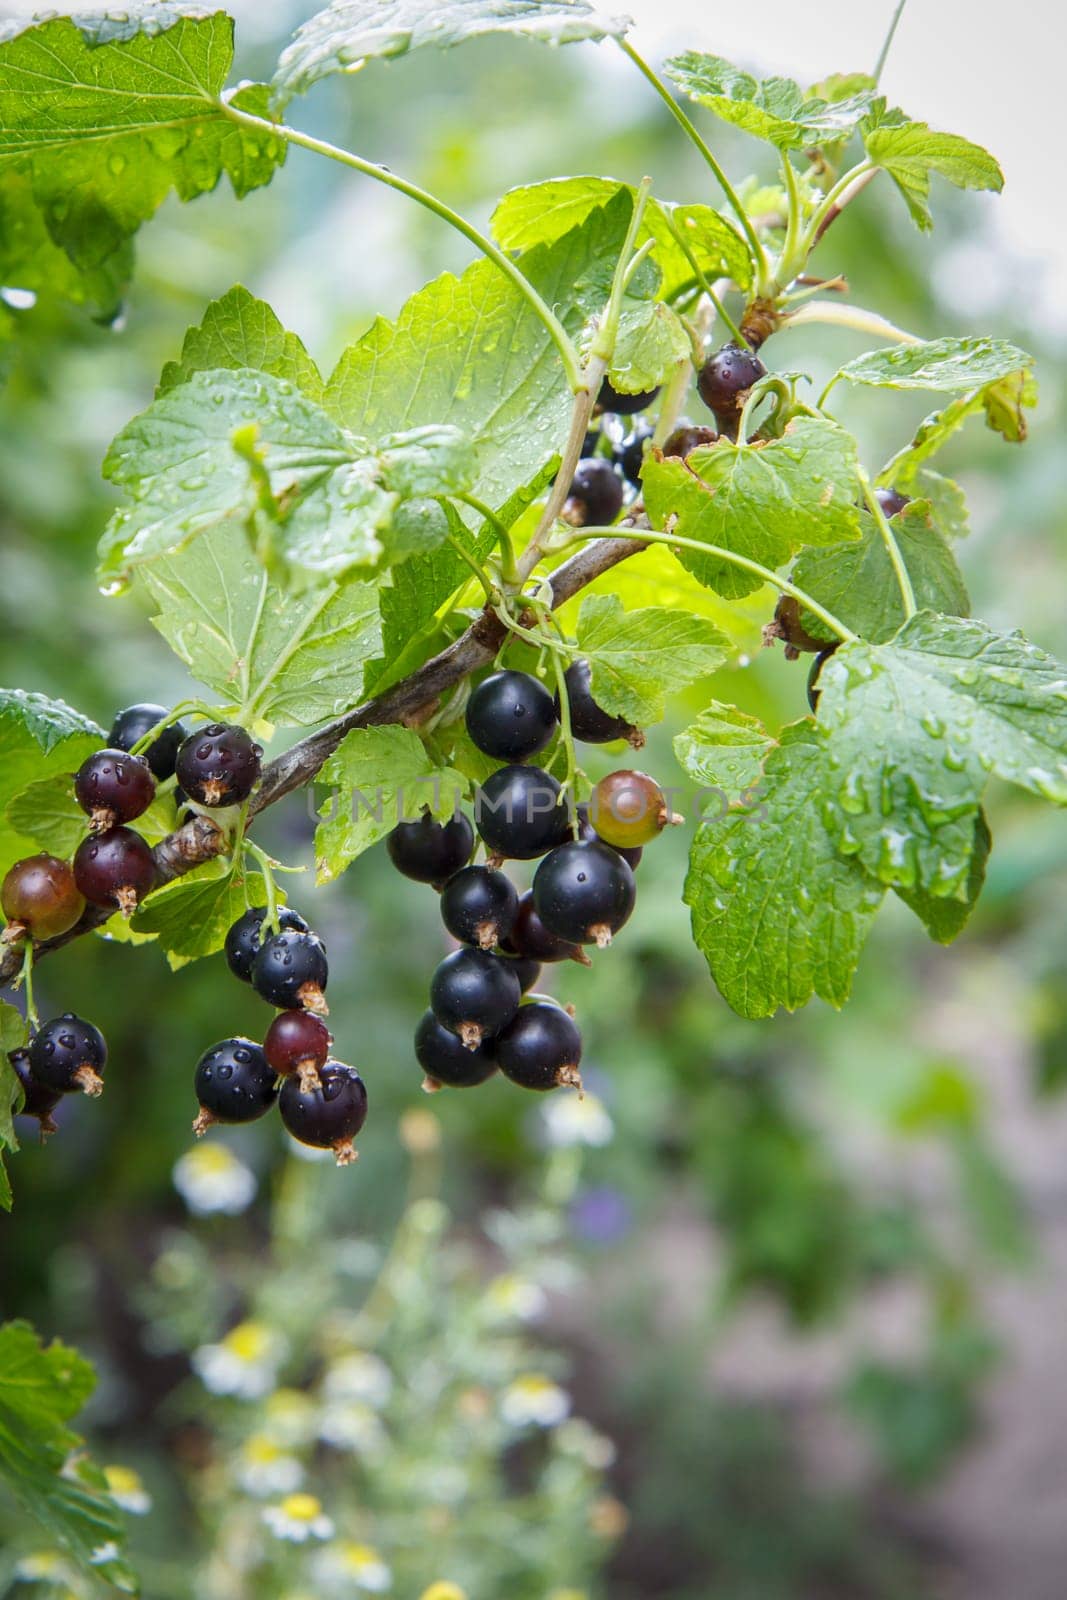 Branch of black currant with berries in garden in summer day with blurred natural background.